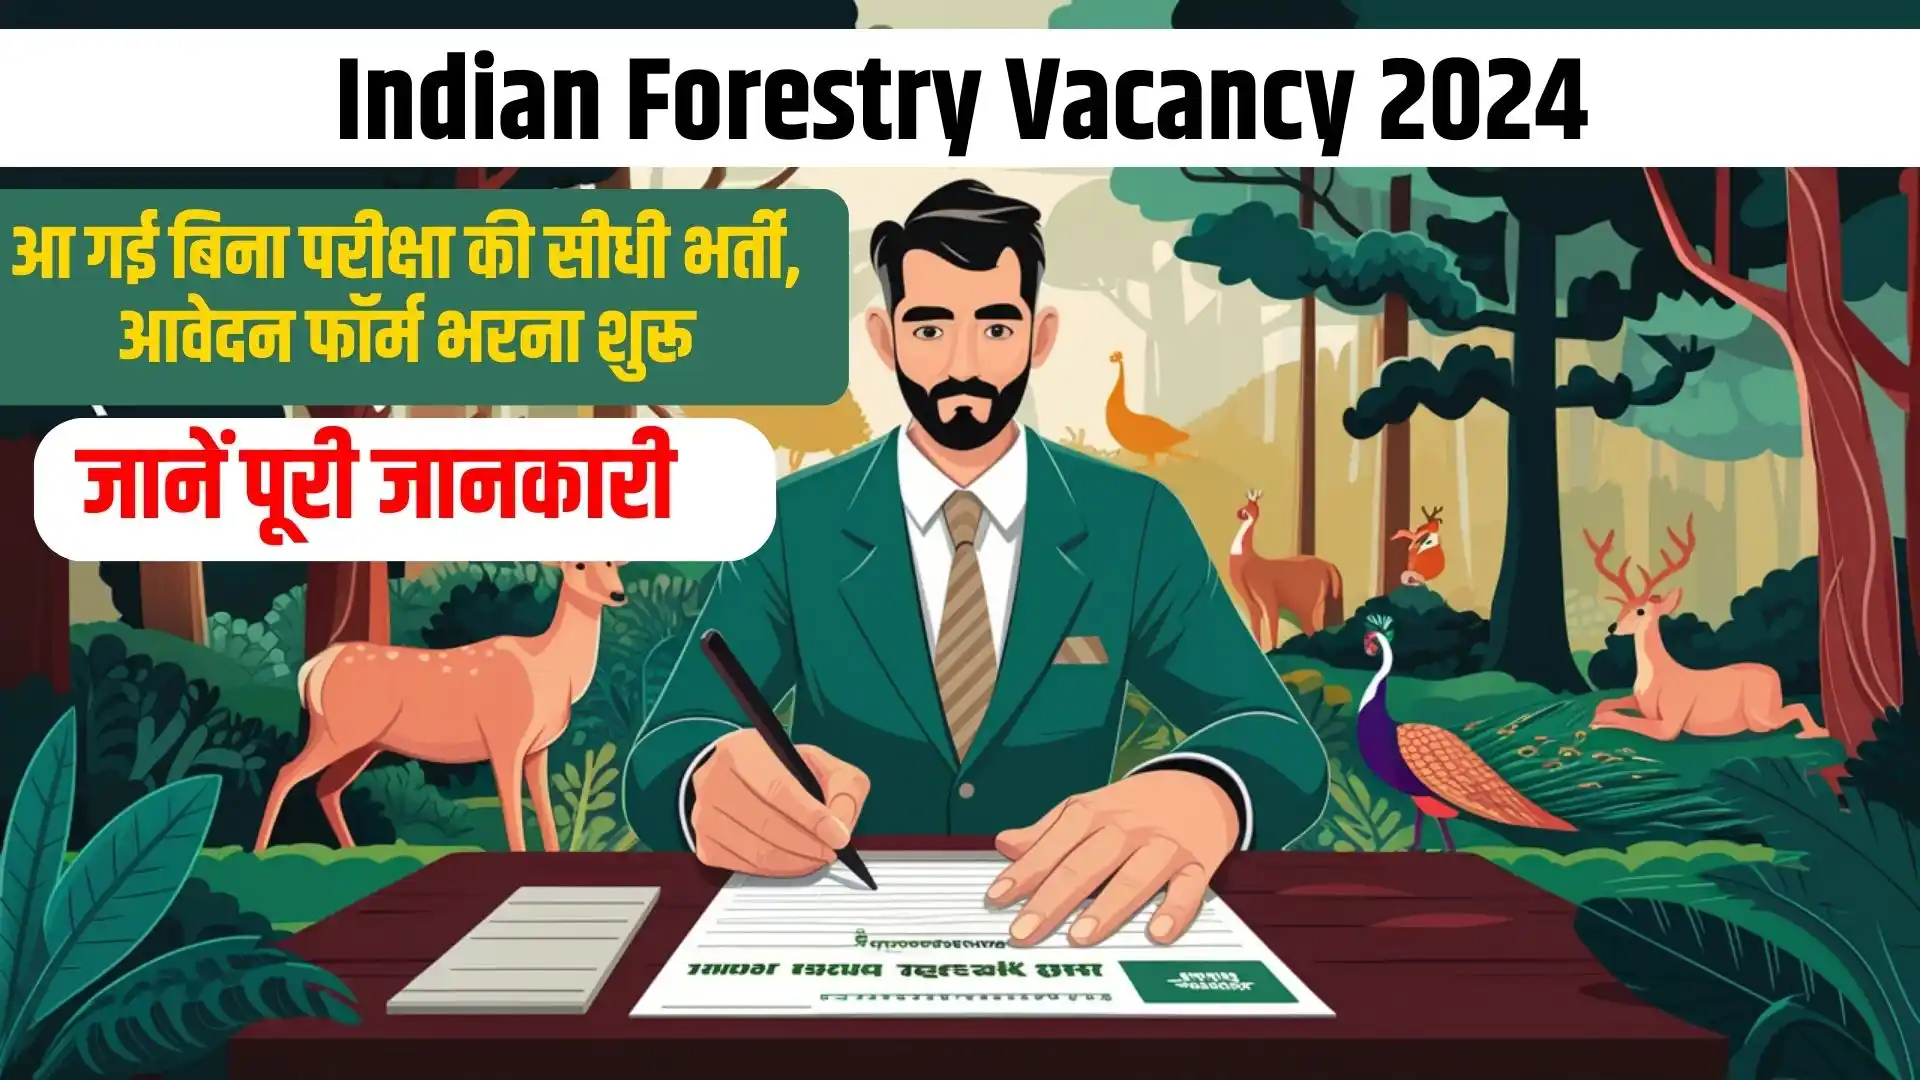 Indian Forestry Vacancy